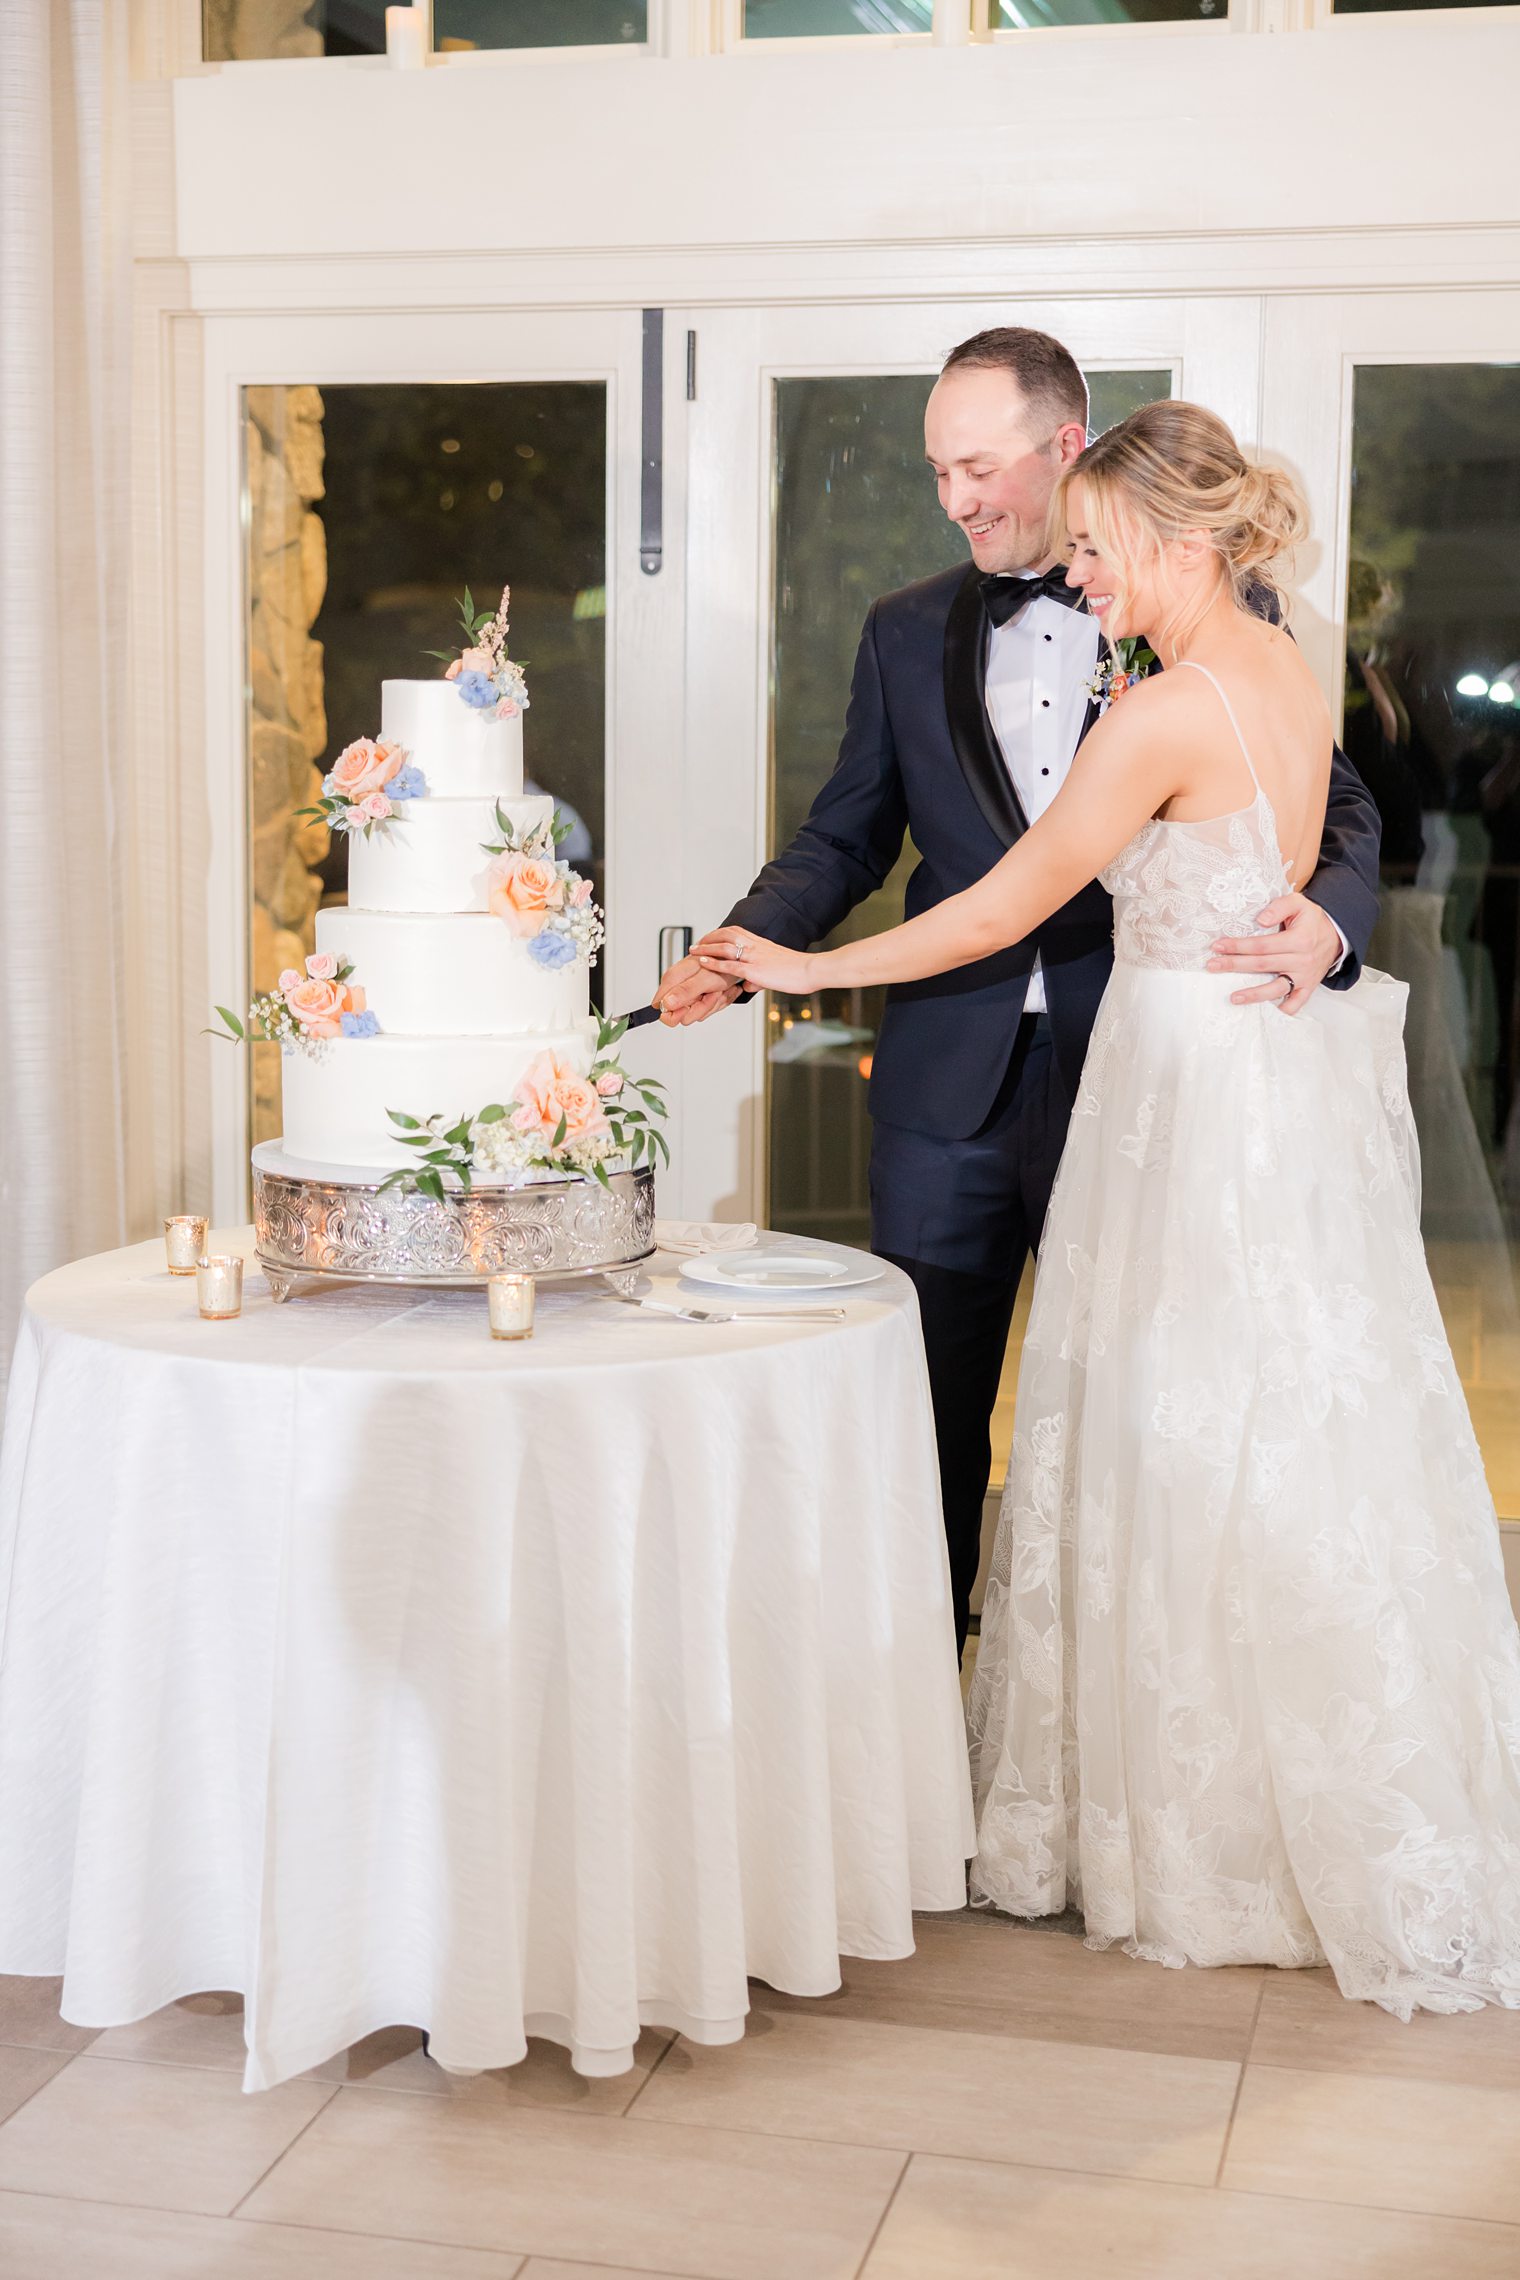 Husband and Wife cutting their wedding cake at Indian Trail Club